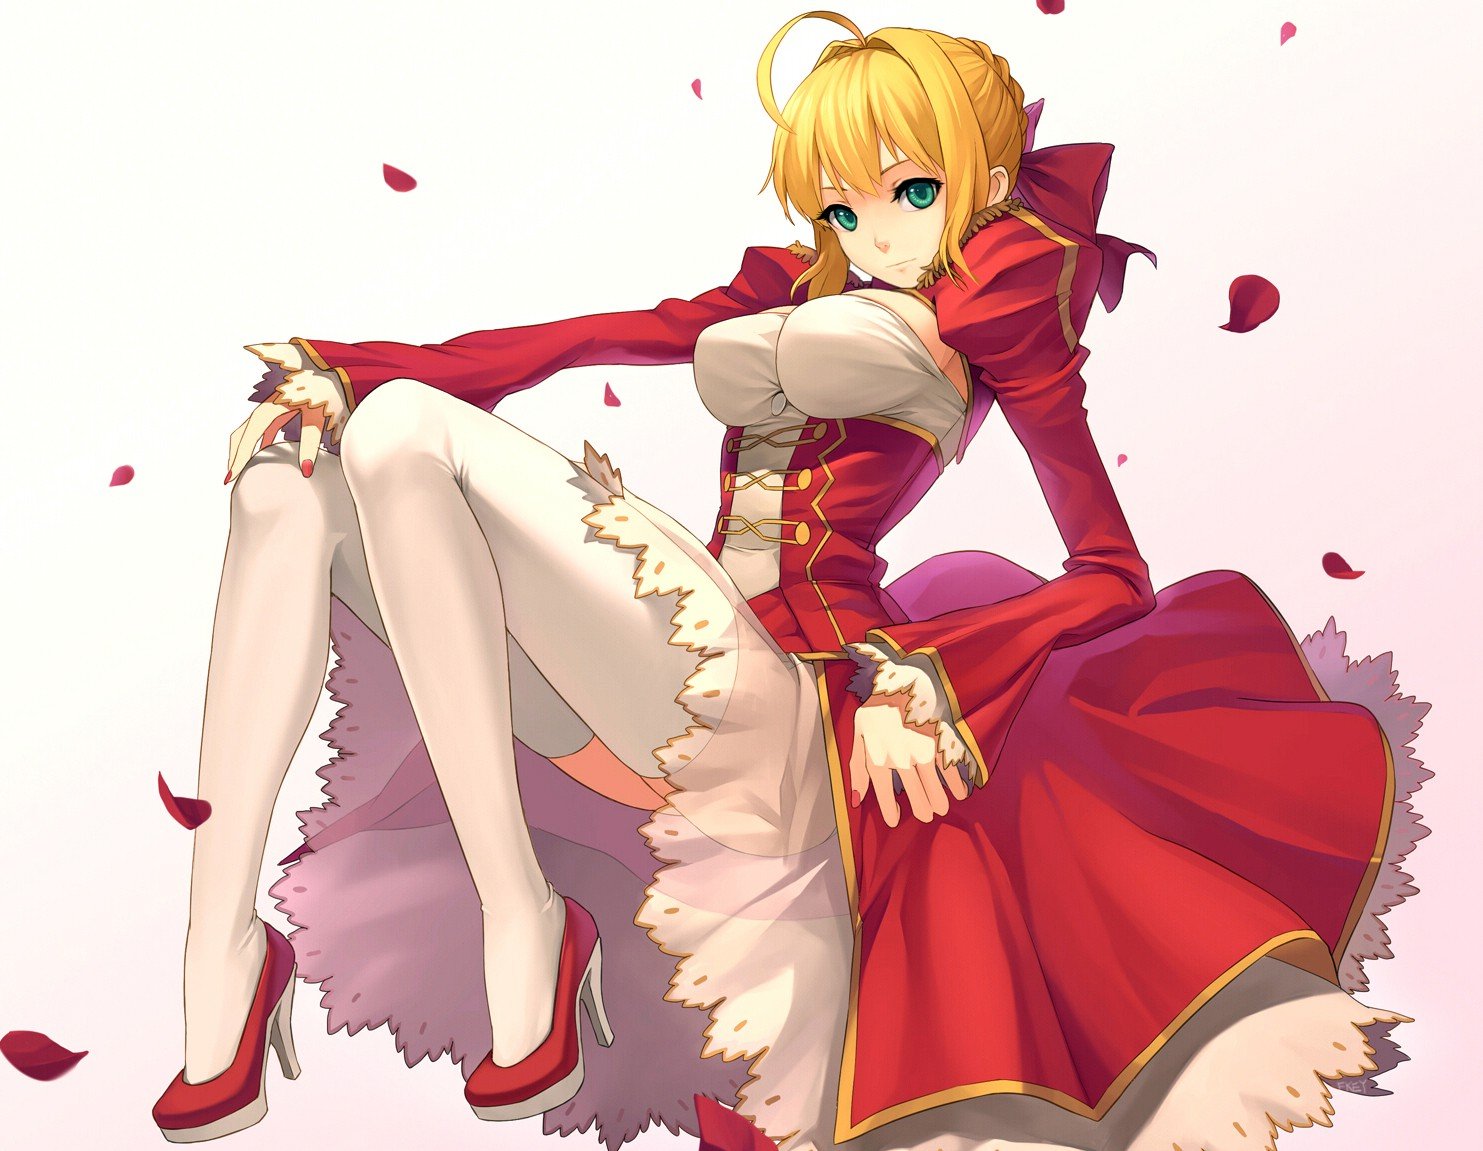 video, Games, Dress, Night, Short, Hair, Thigh, Highs, Type moon, Anime, Simple, Background, Anime, Girls, Fate extra, Saber, Extra, Fate, Series Wallpaper